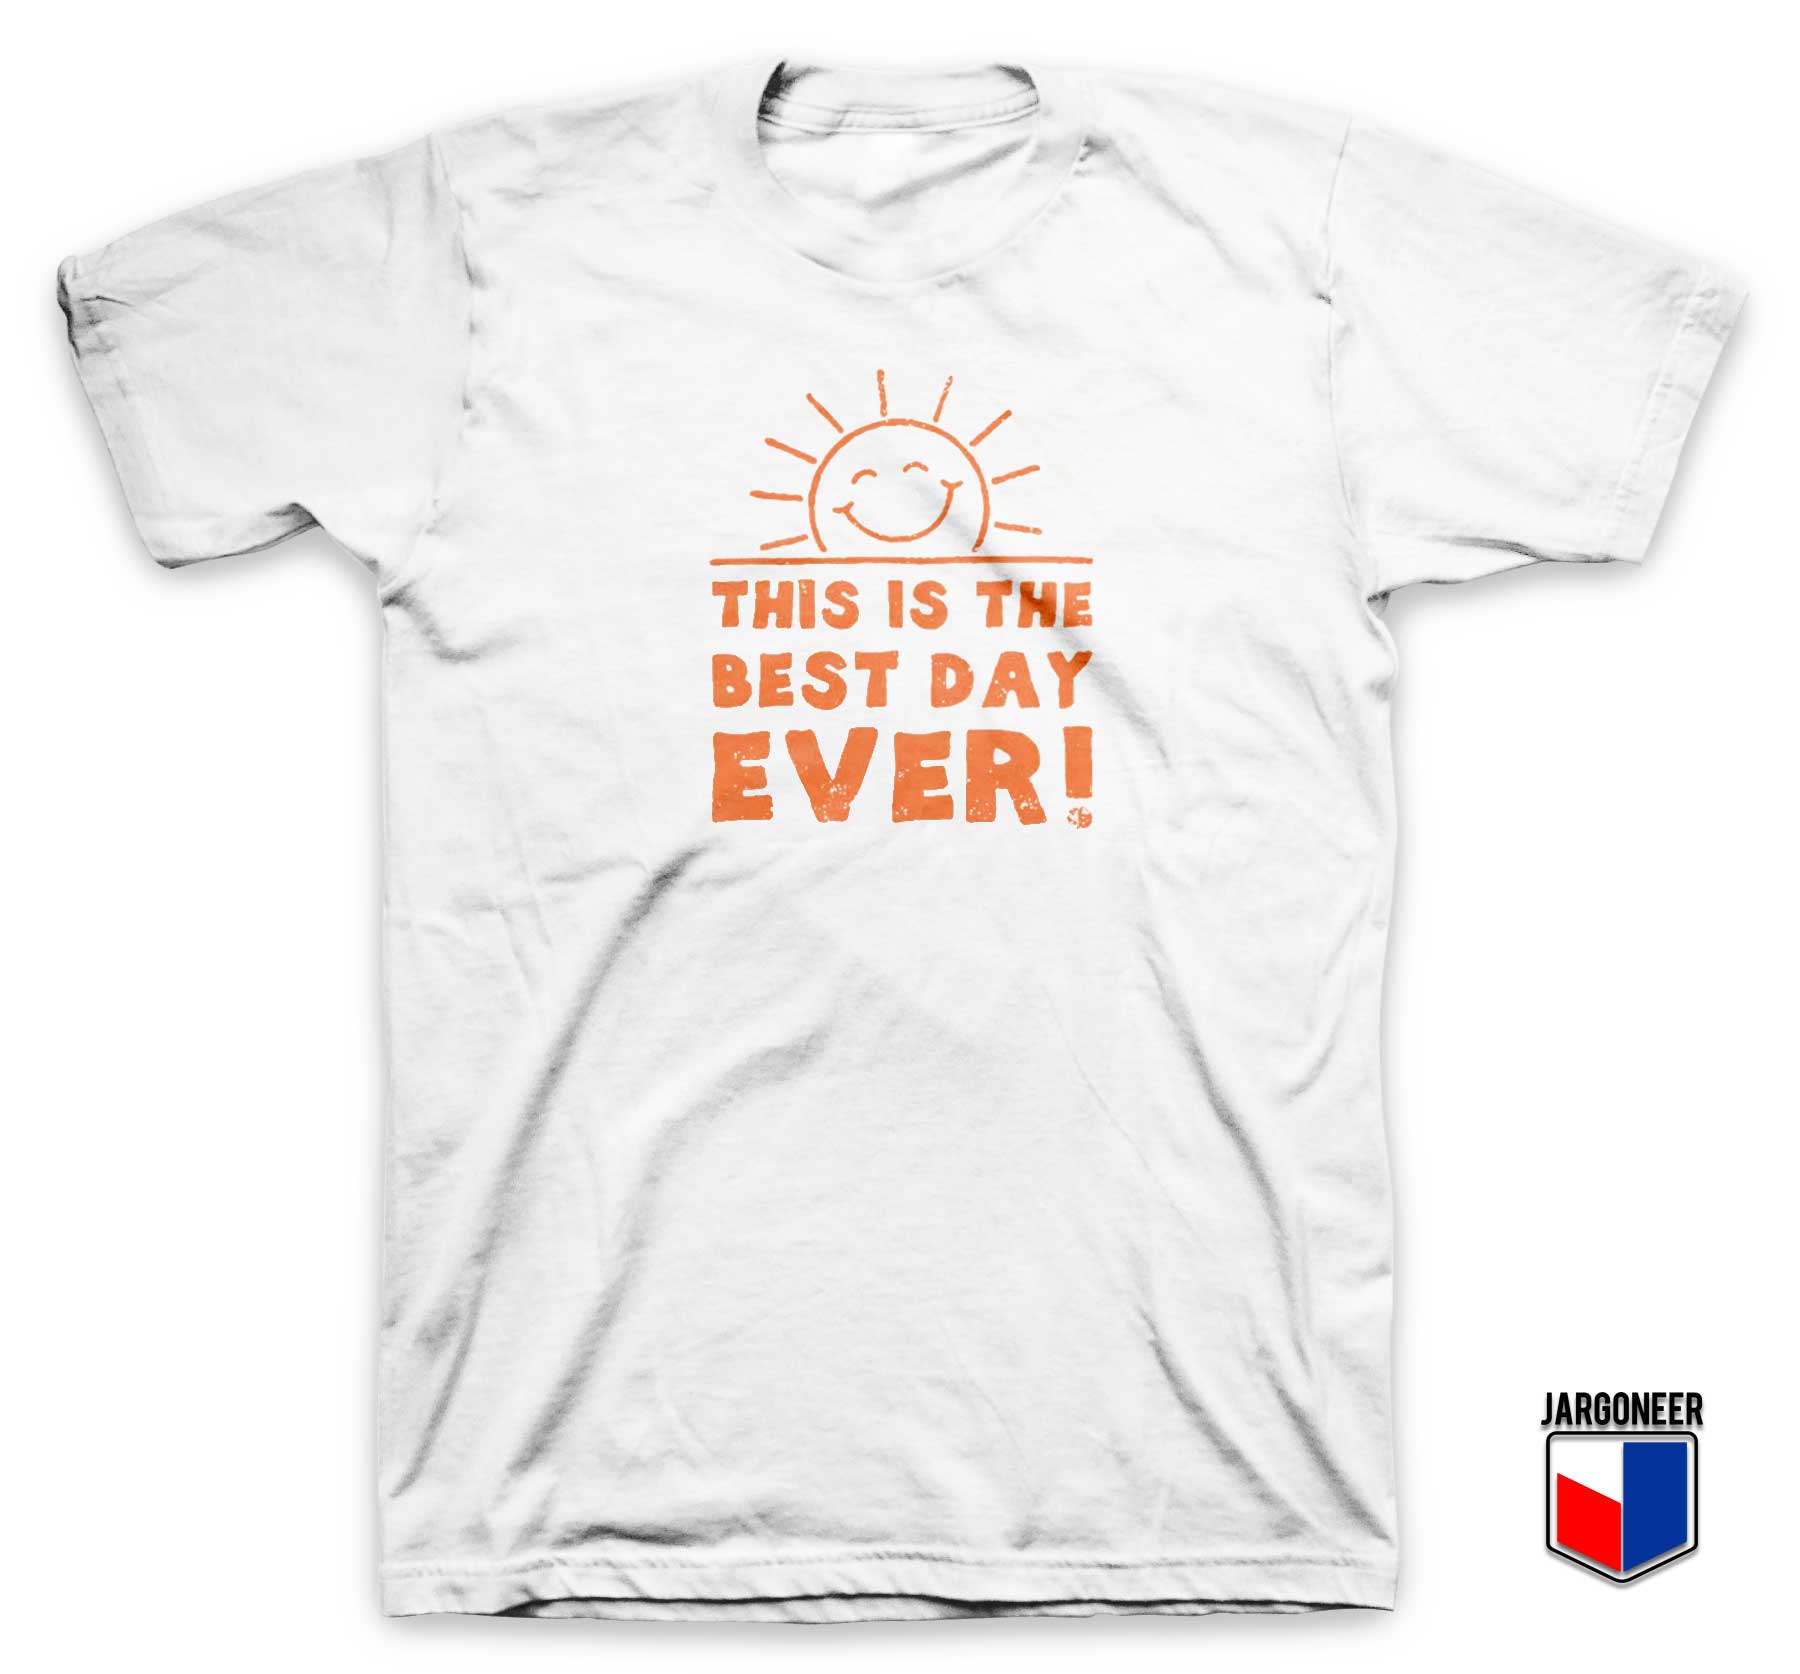 This Is The Best Day Ever T Shirt - Shop Unique Graphic Cool Shirt Designs